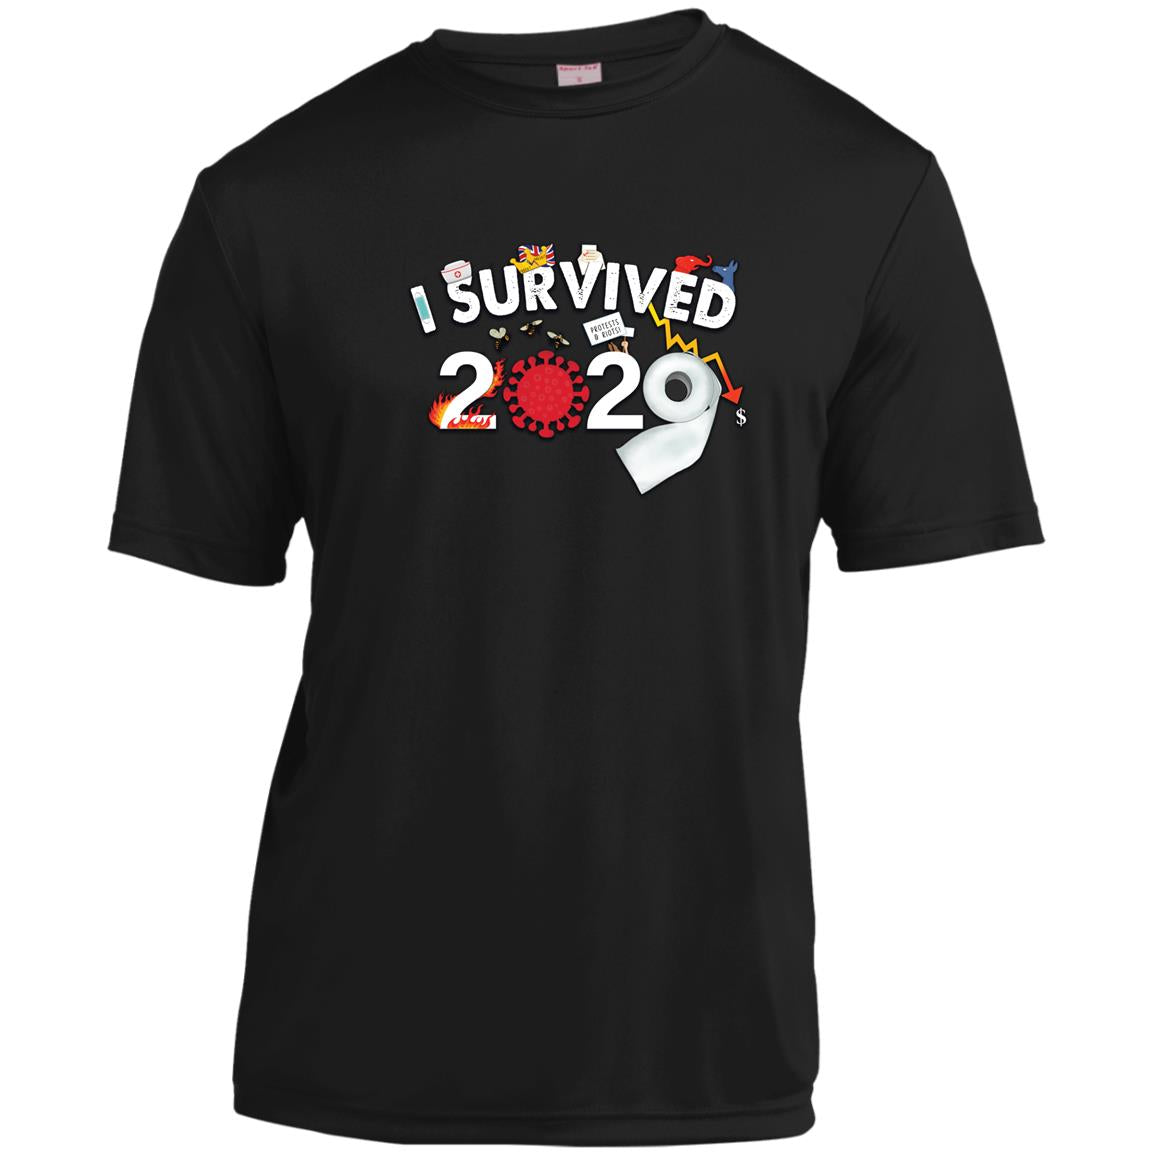 I Survived 2020 - Youth Moisture-Wicking T-Shirt